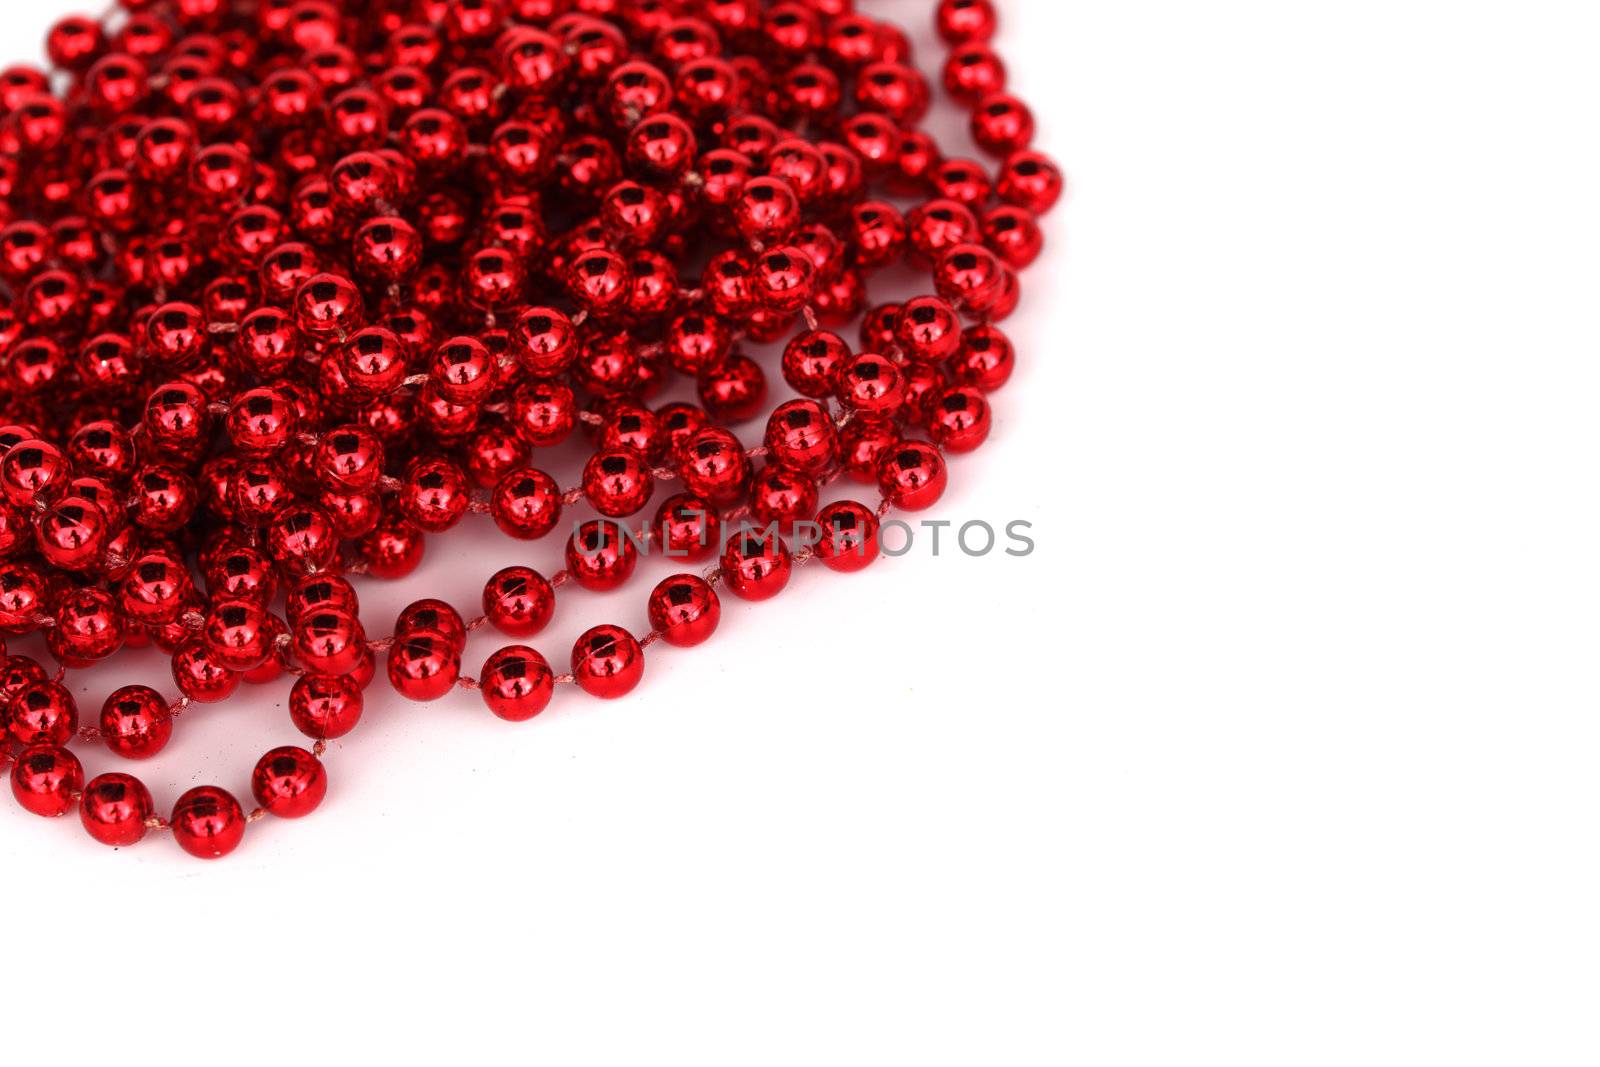  red christmas decoration isolated on white background